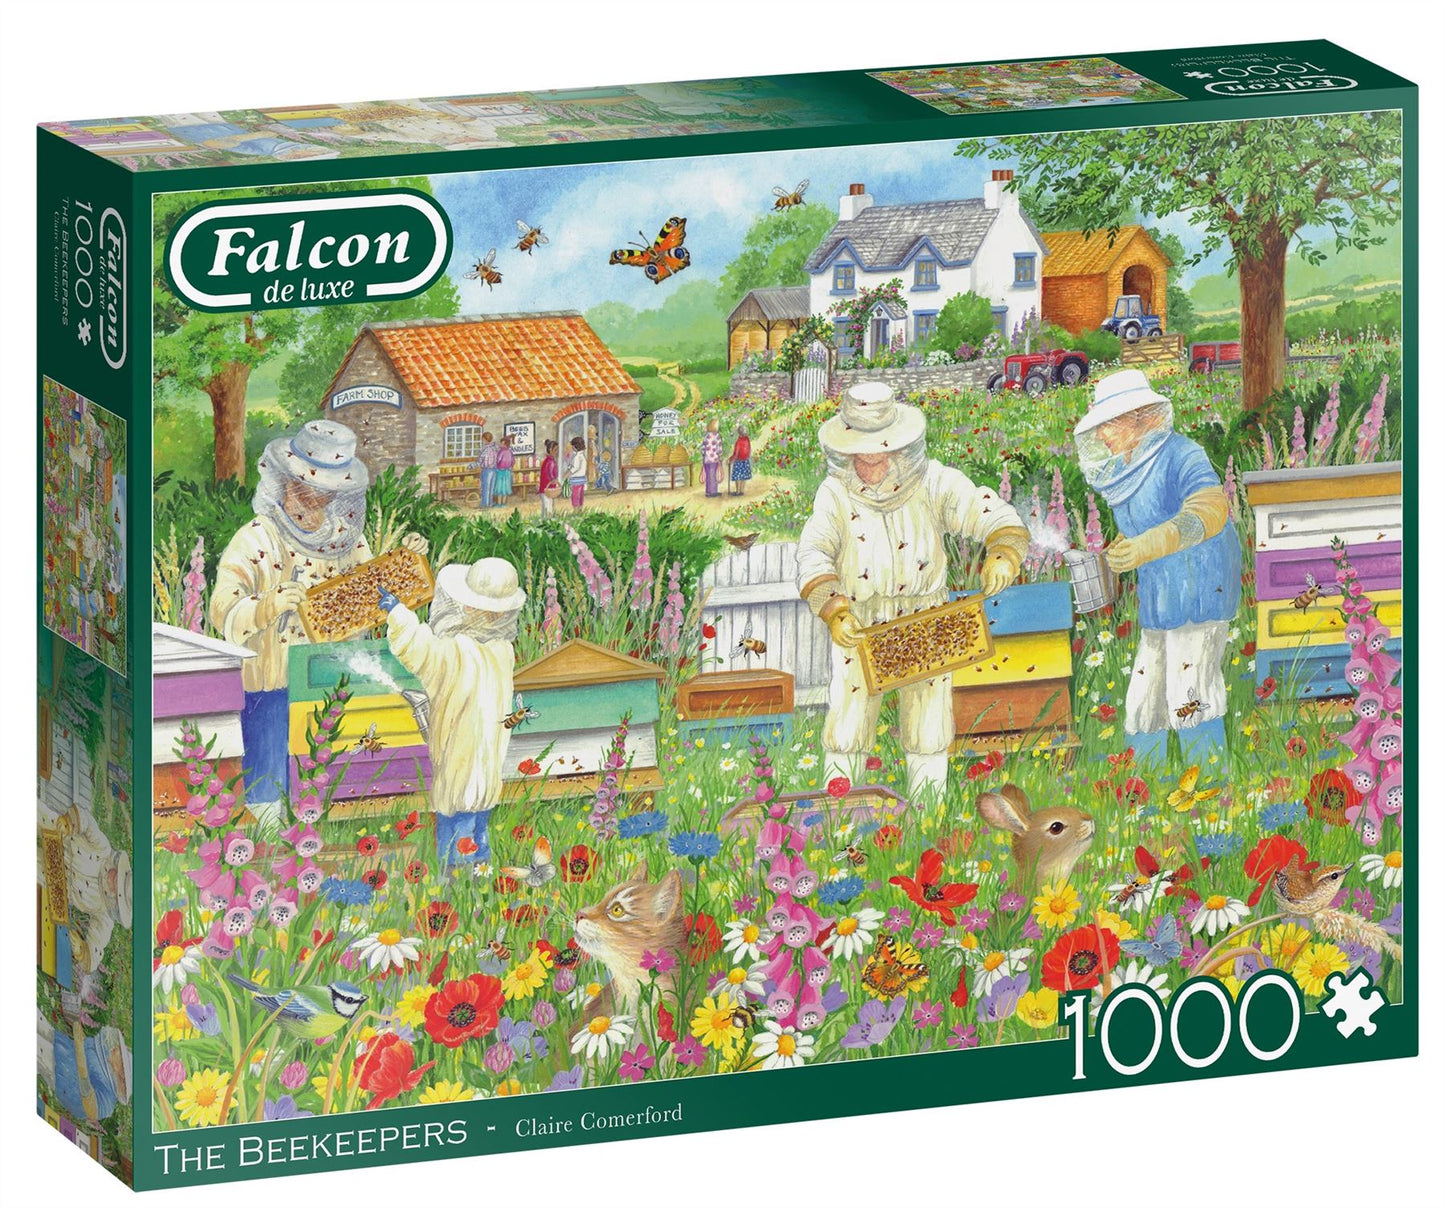 The Beekeepers 1000 Piece Jigsaw Puzzle box 1